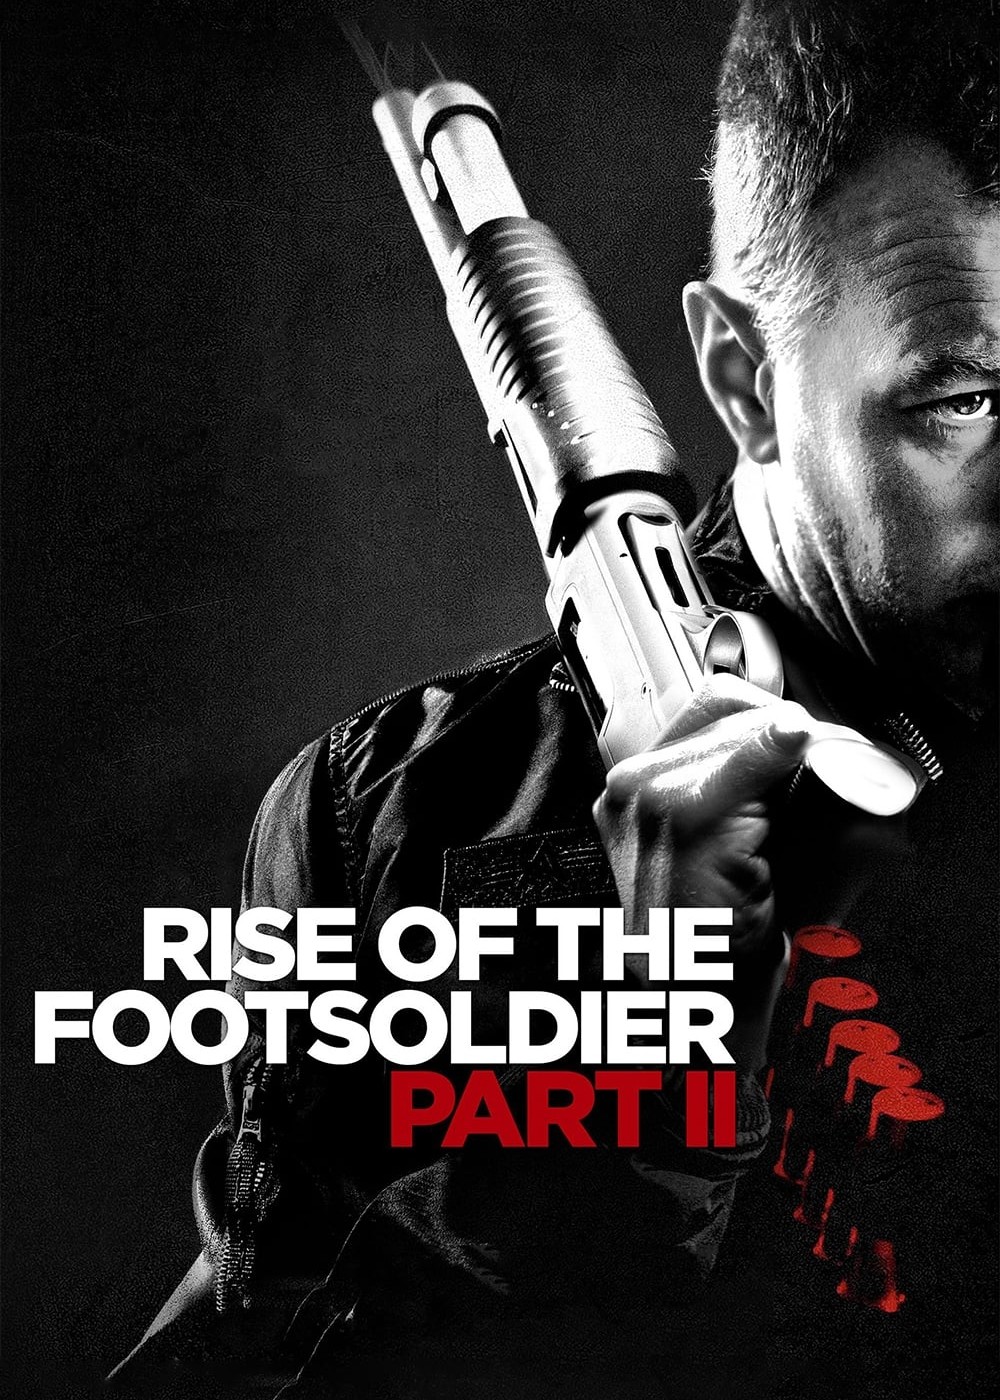 Rise of the Footsoldier Part II (Rise of the Footsoldier Part II) [2015]